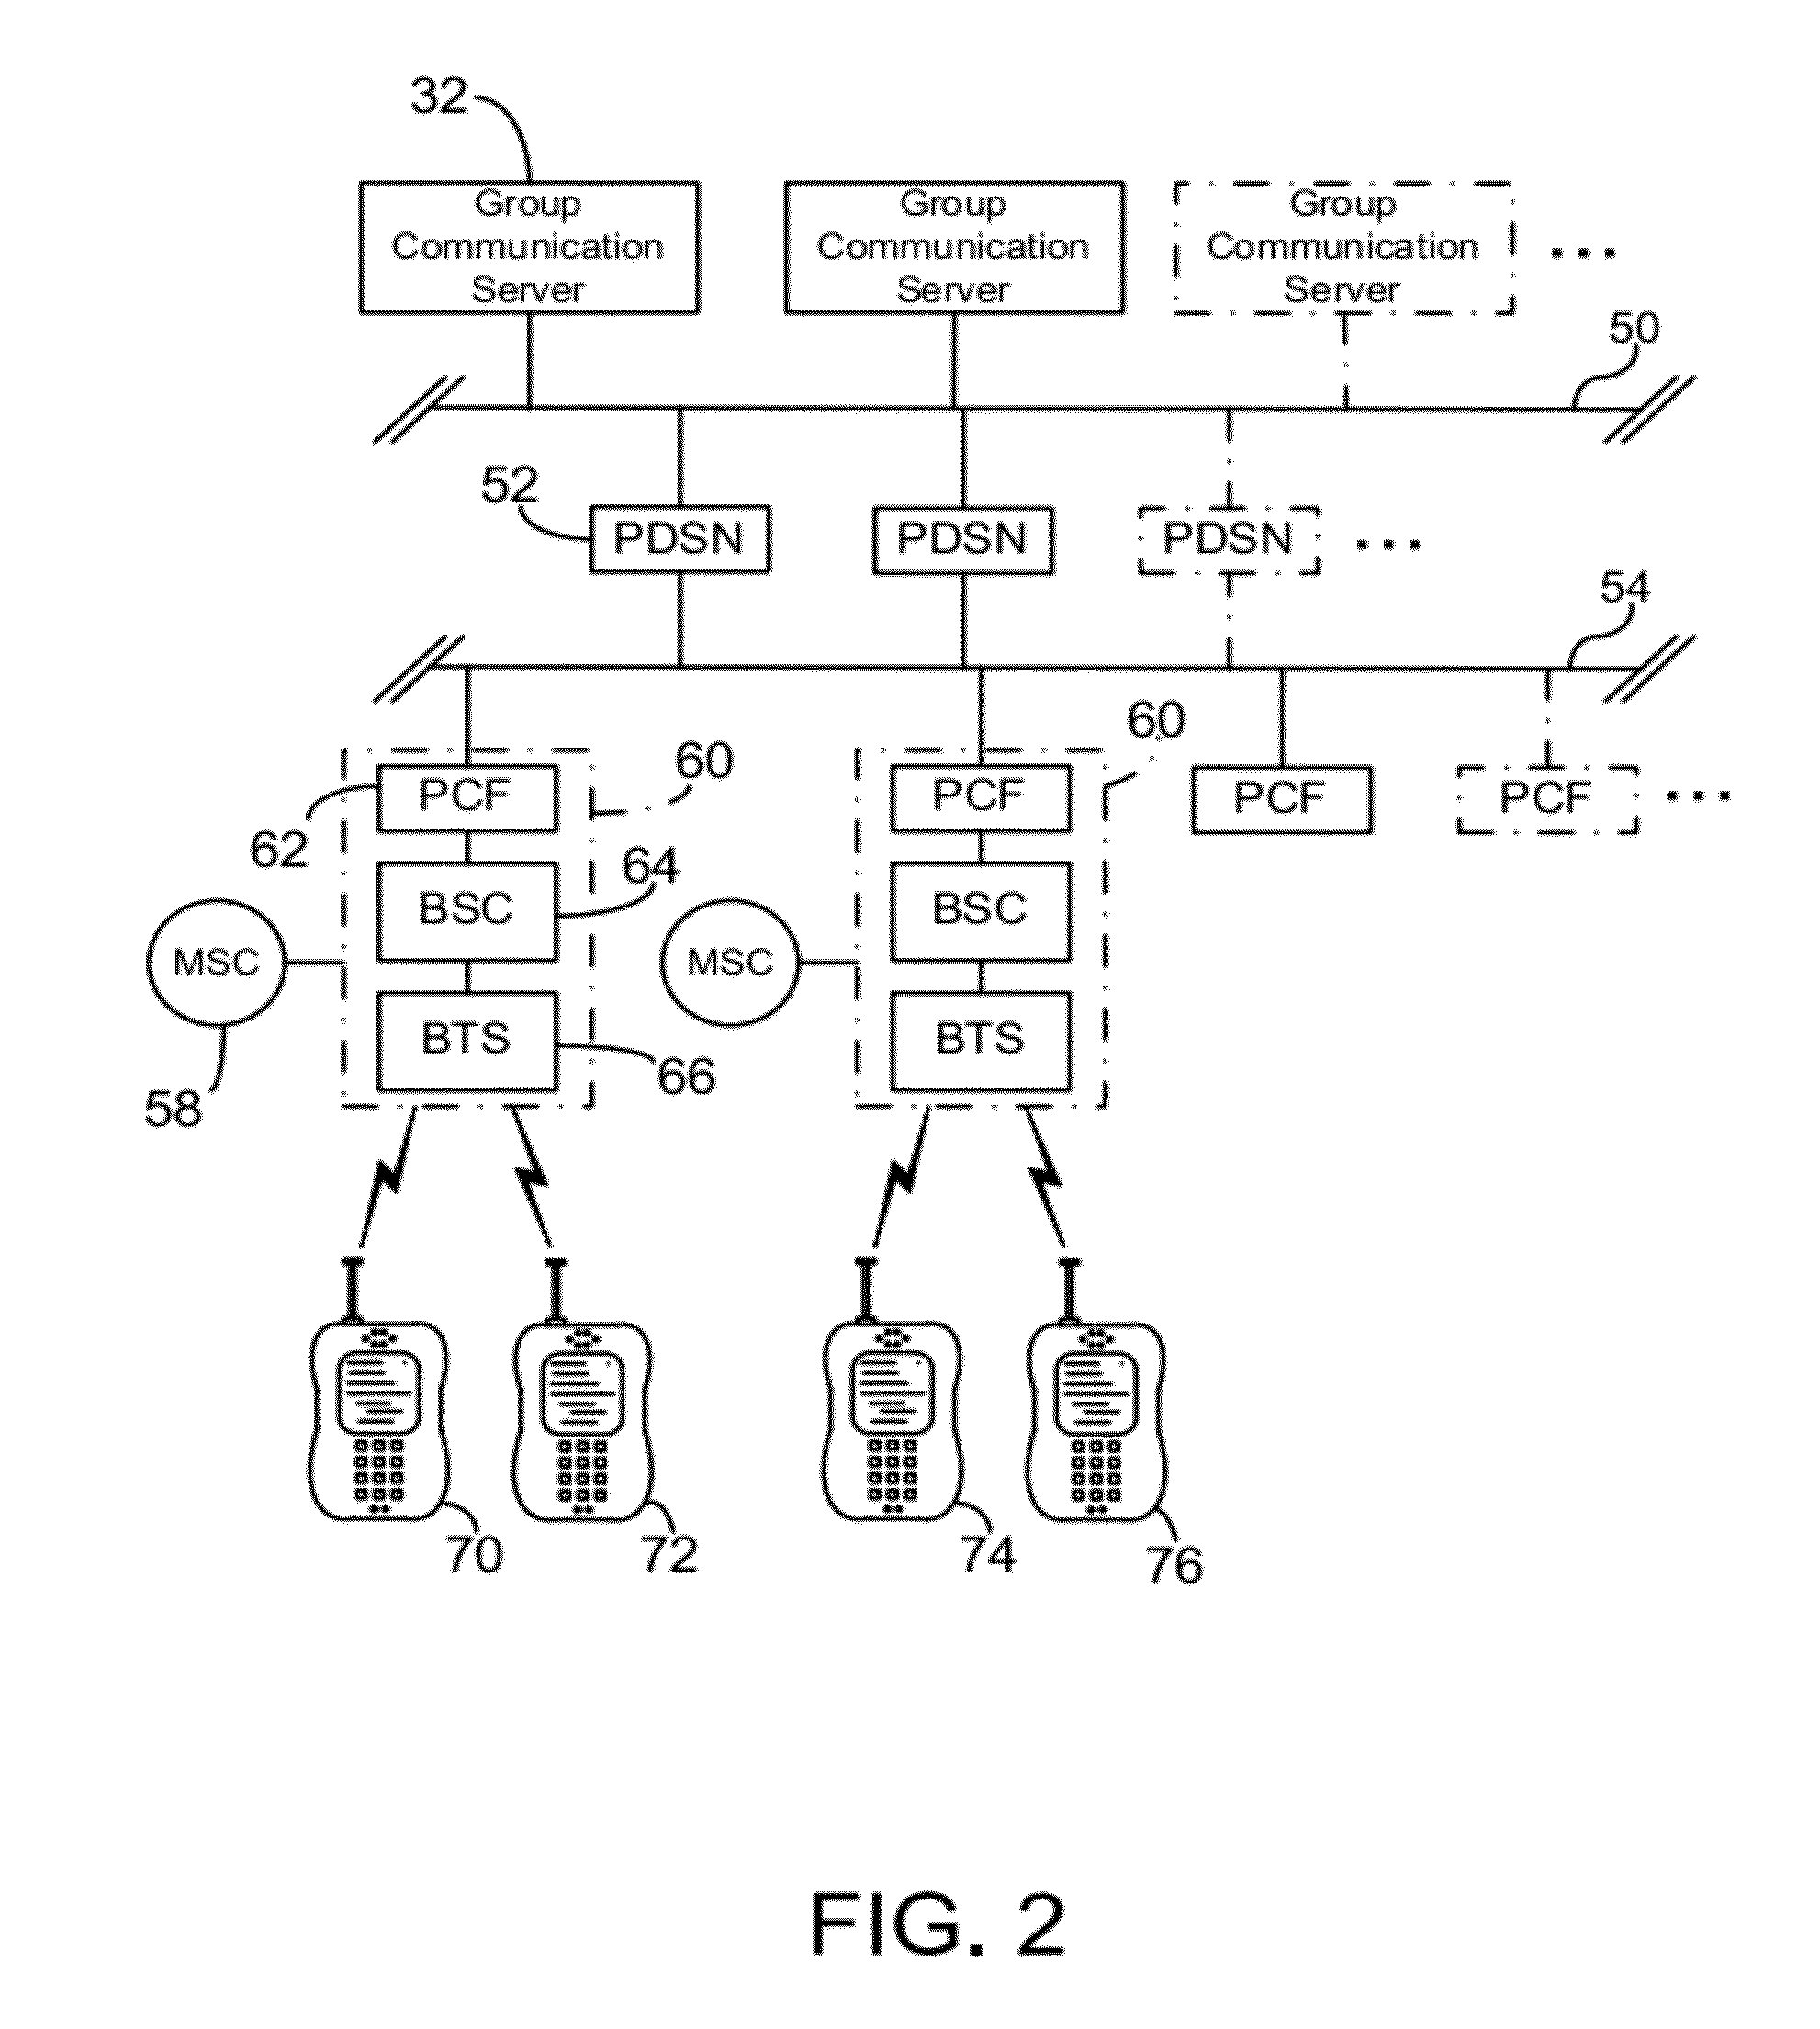 Adaptive automatic detail diagnostic log collection in a wireless communication system